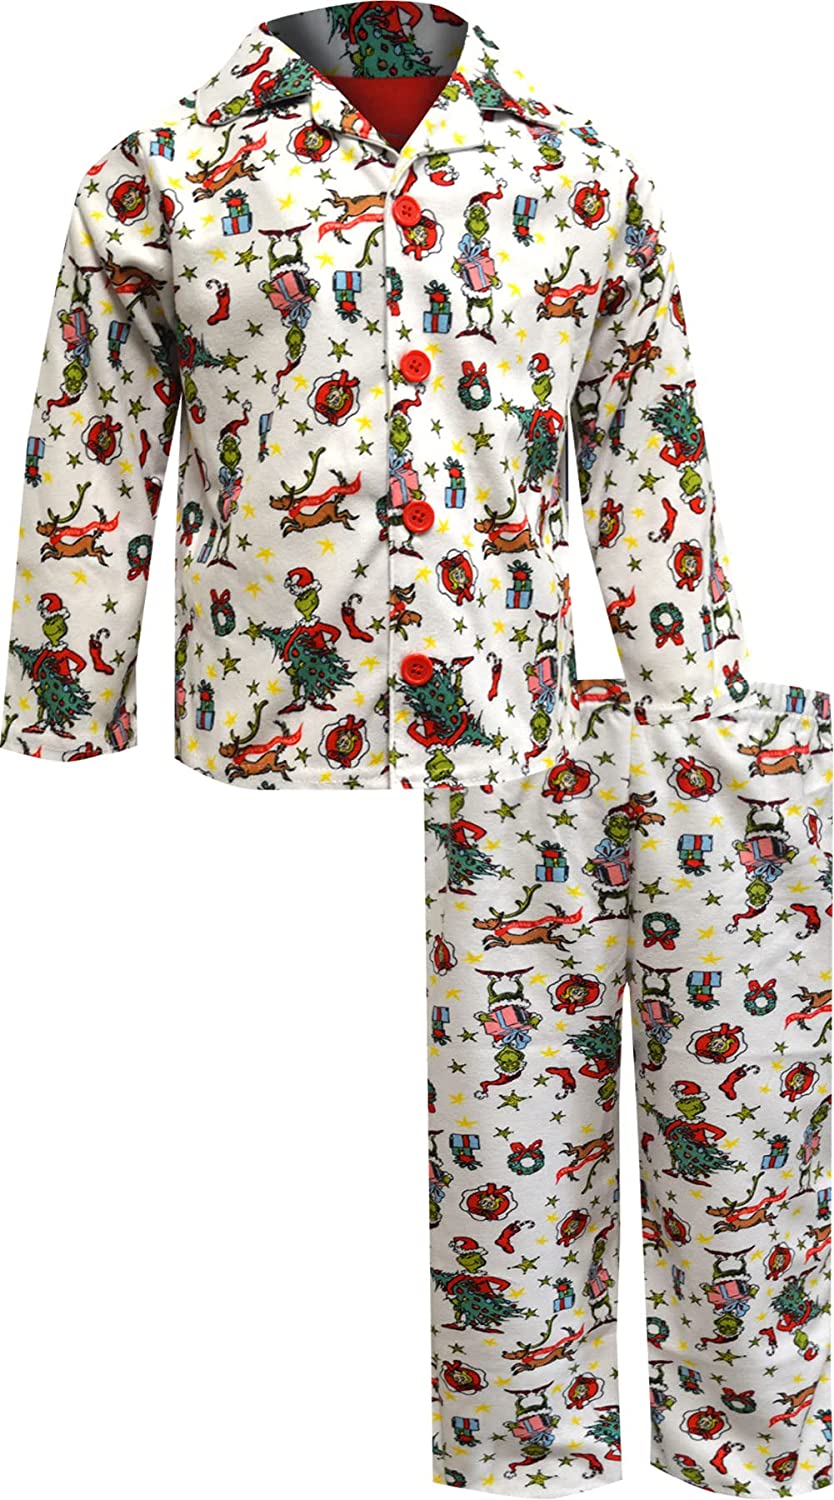 The Grinch Boys' 2pc Toddler Traditional Pajamas Set